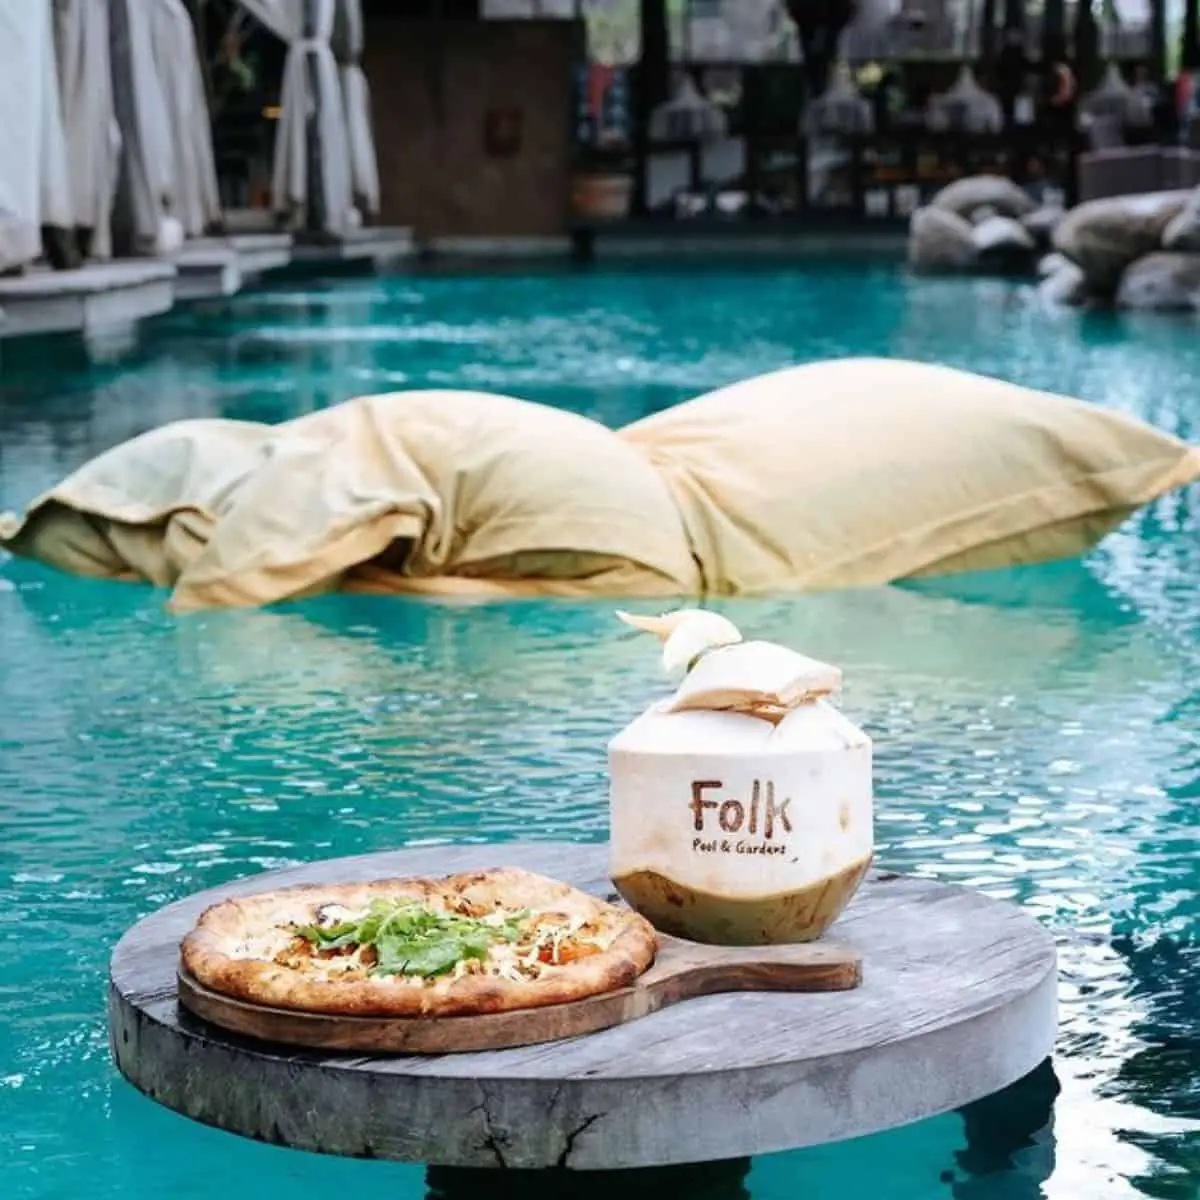 Pizza, coconut and a pool at Folk Pool Garden